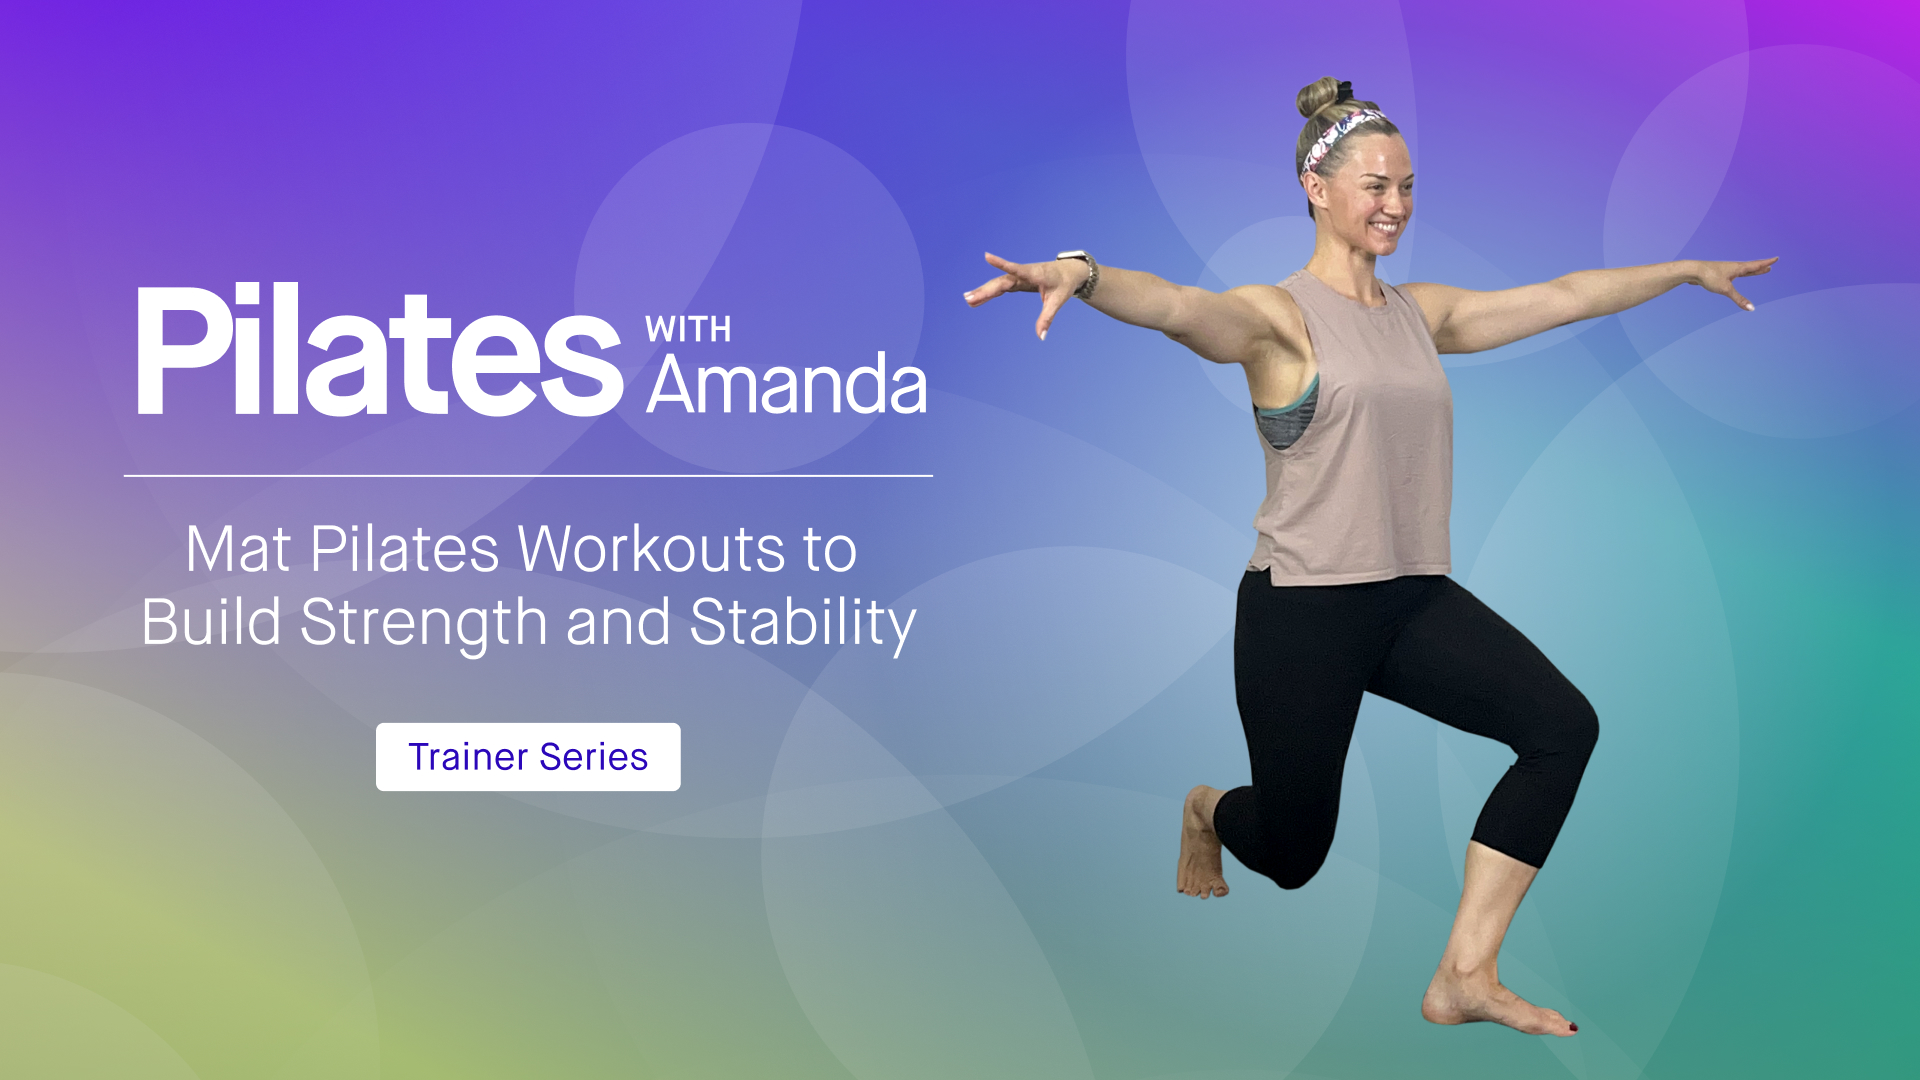 5 Day Challenge Trainer Series: Pilates with Amanda Total Body Mat